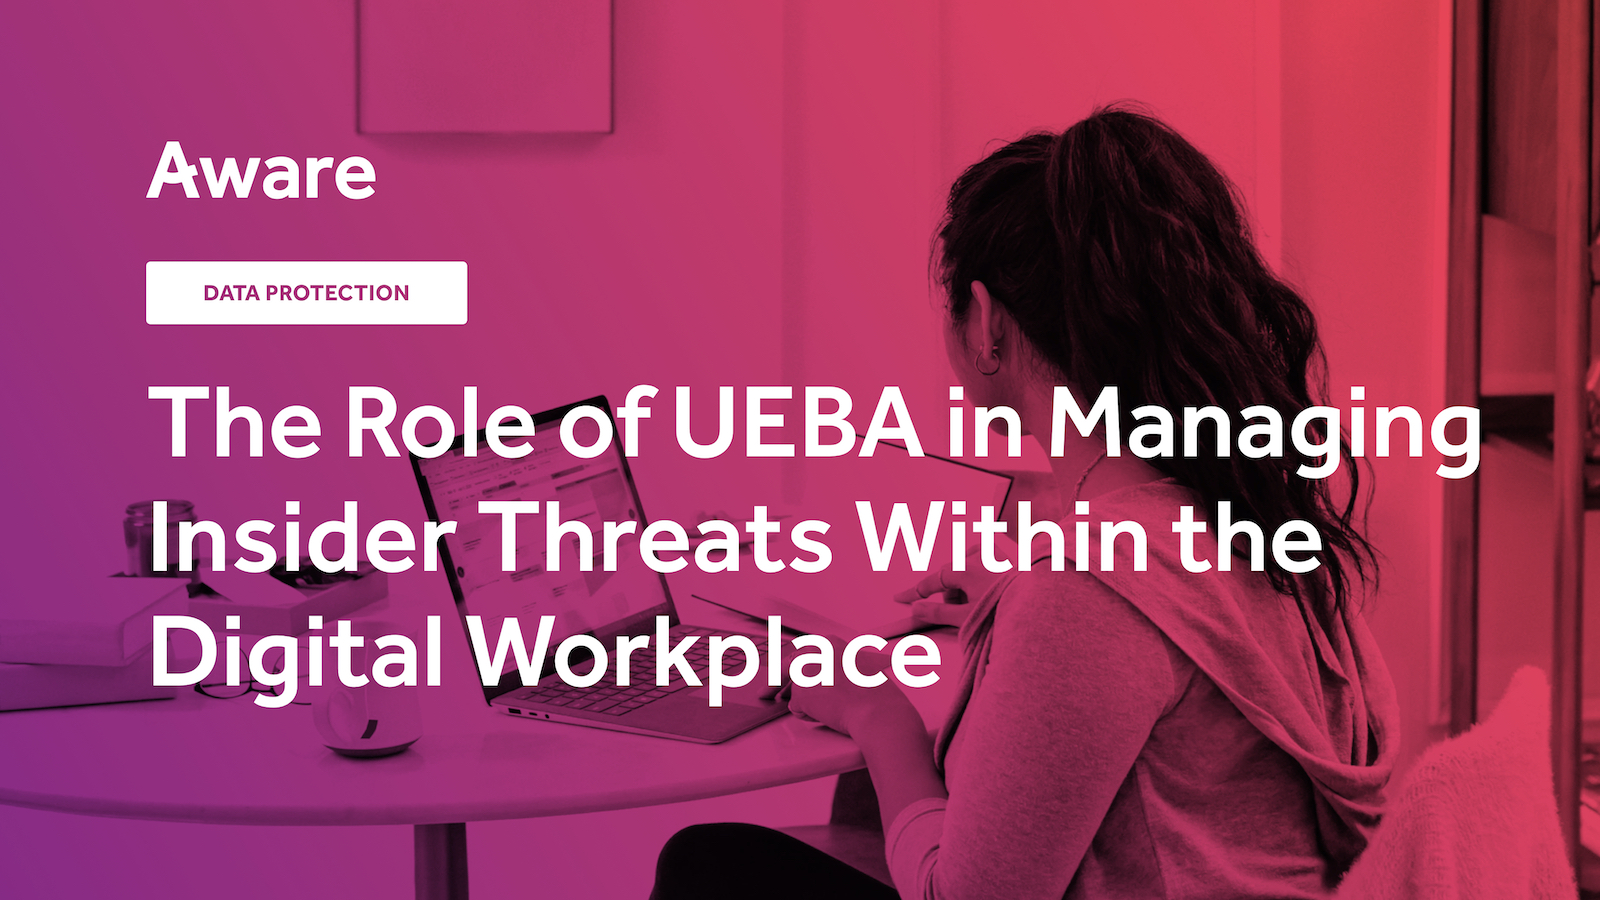 The Role of UEBA in Managing Insider Threats Within the Digital Workplace